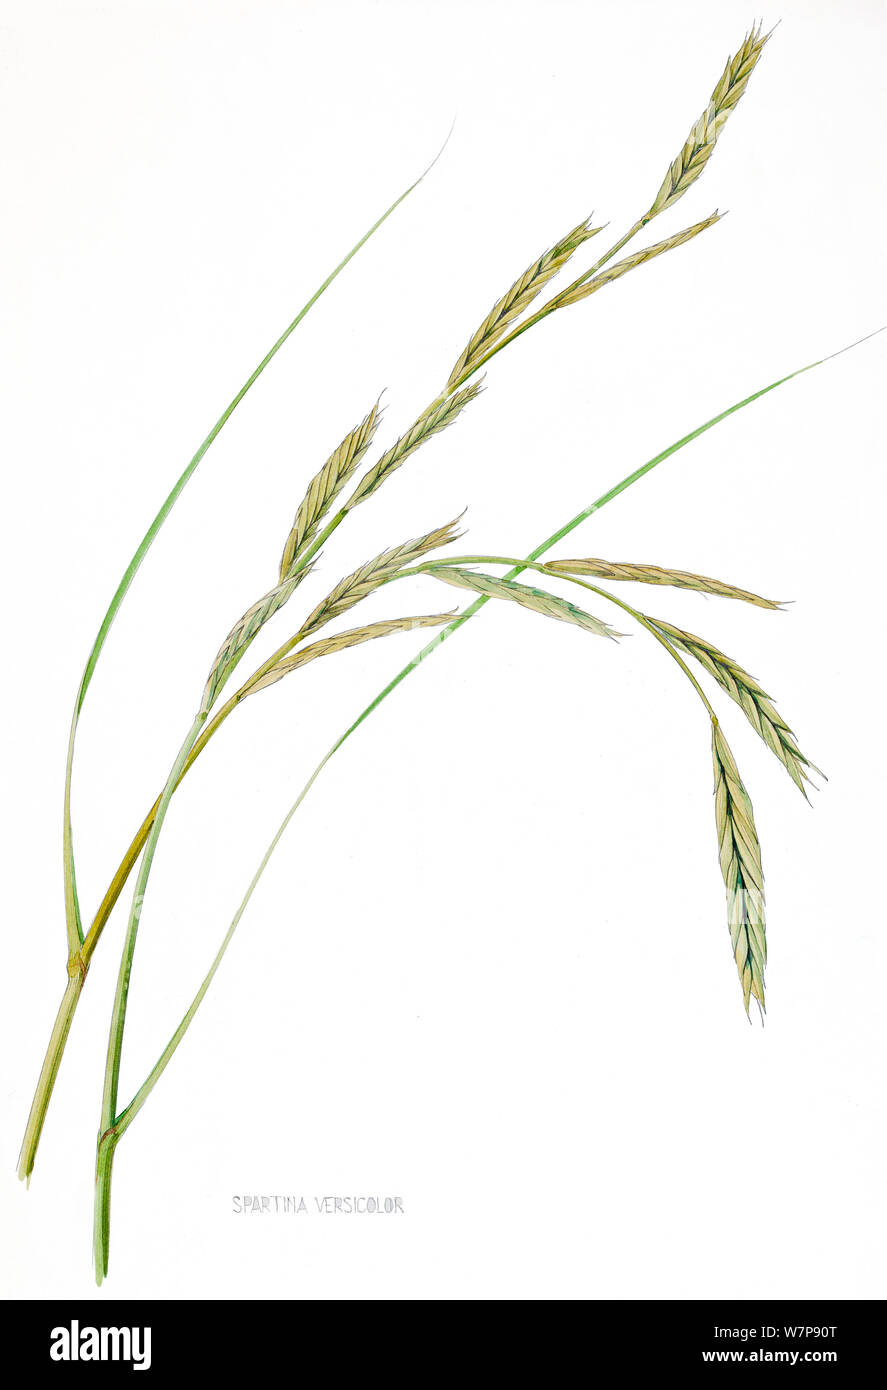 Illustration of cordgrass (Spartina versicolor). Pencil and watercolor painting. Stock Photo